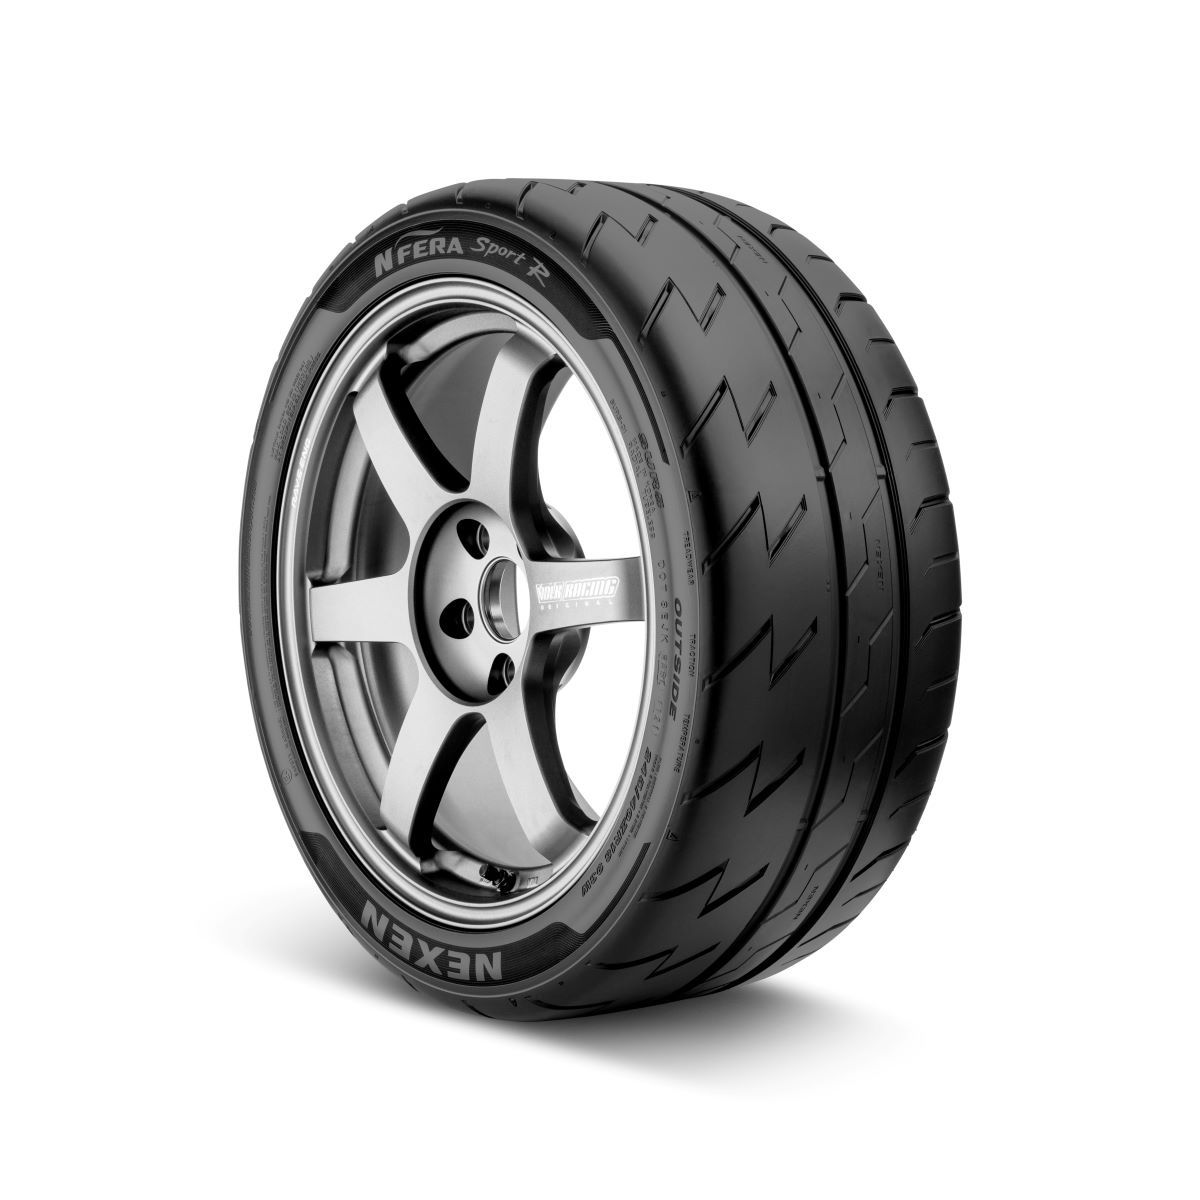 NEXEN TIRE DEBUTS TWO ALL-NEW TIRES AT ANNUAL SEMA SHOW